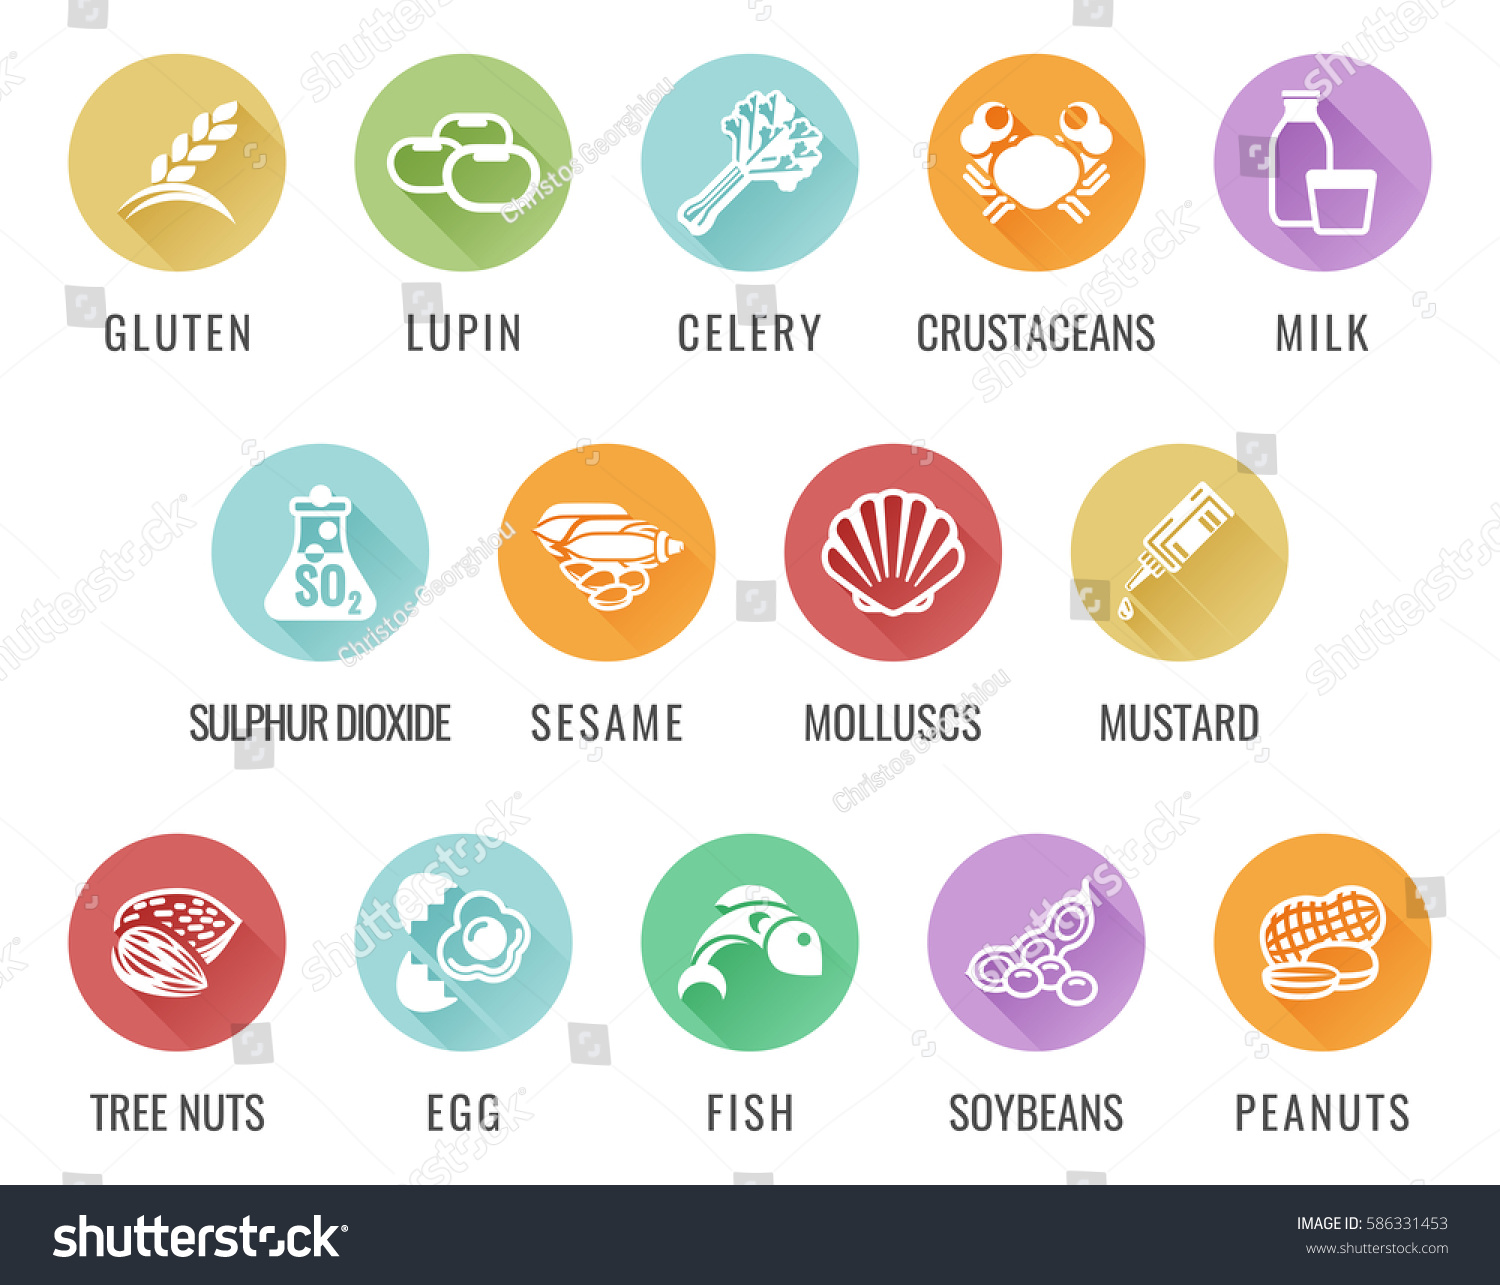 SVG of Food safety allergy icons including the 14 allergies outlined by the EU European Food Safety Authority which encompass the big 8 FDA Major Allergens svg